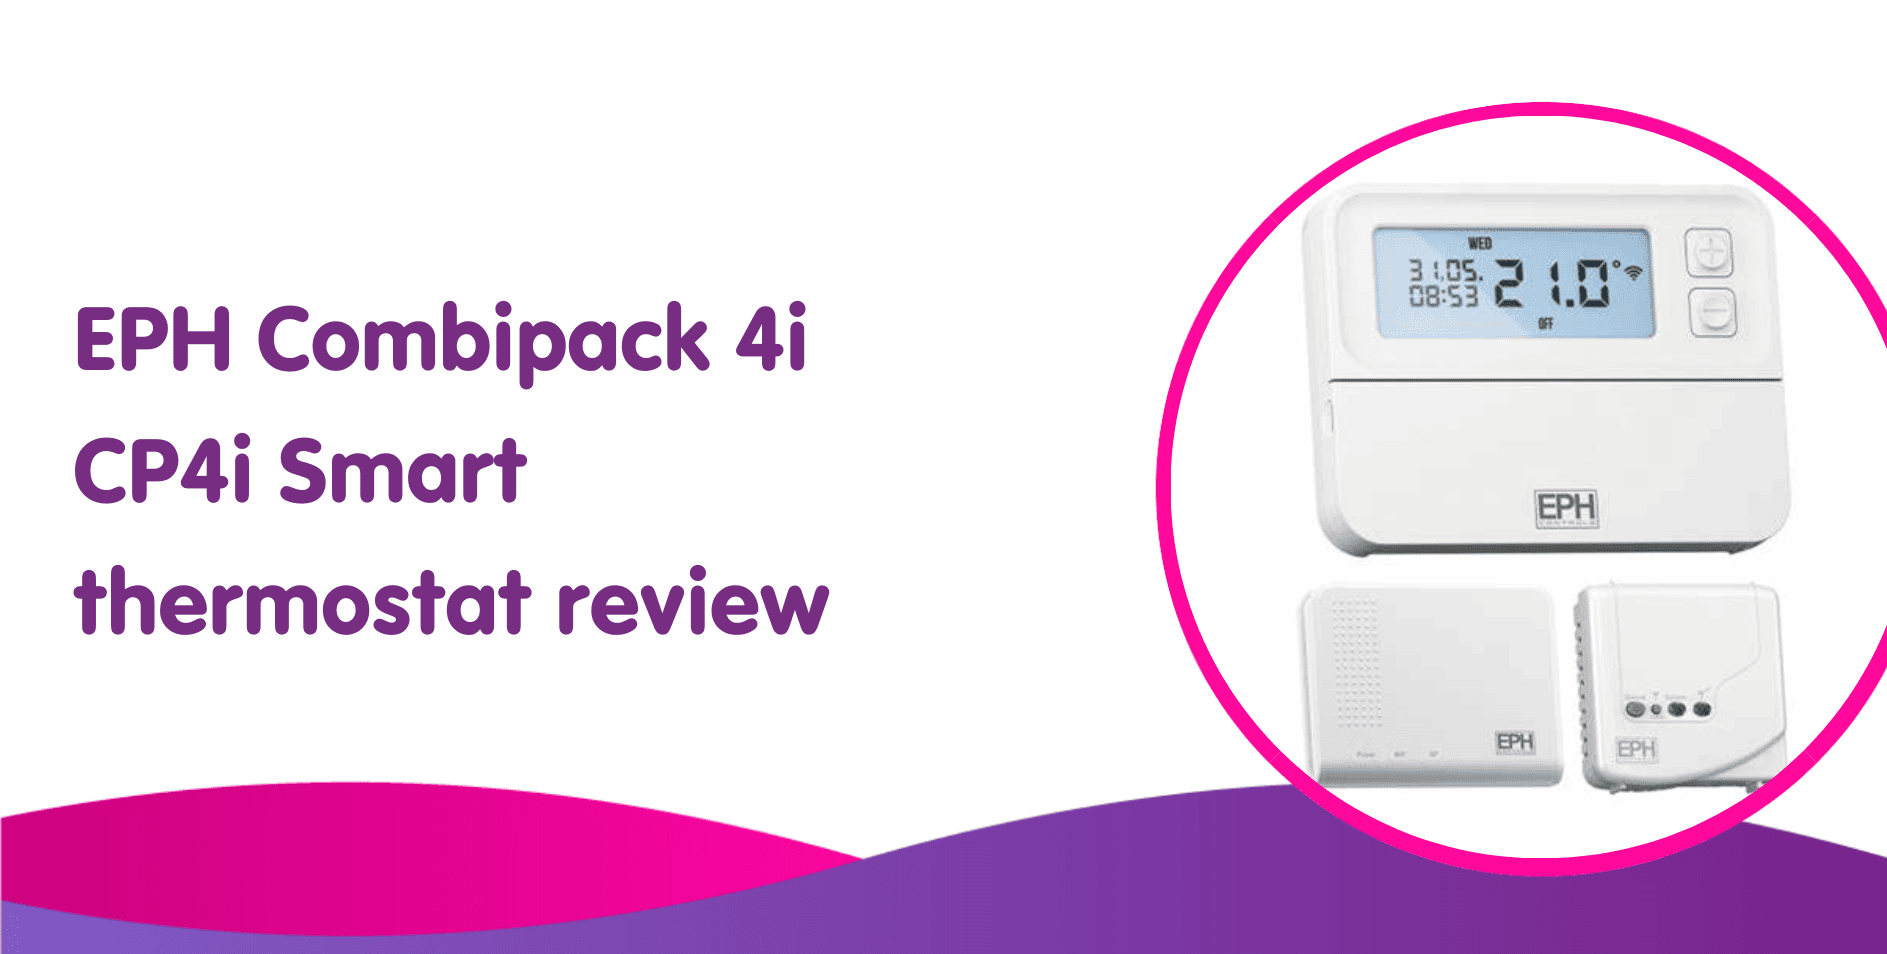 EPH Combipack 4i CP4i Smart thermostat review